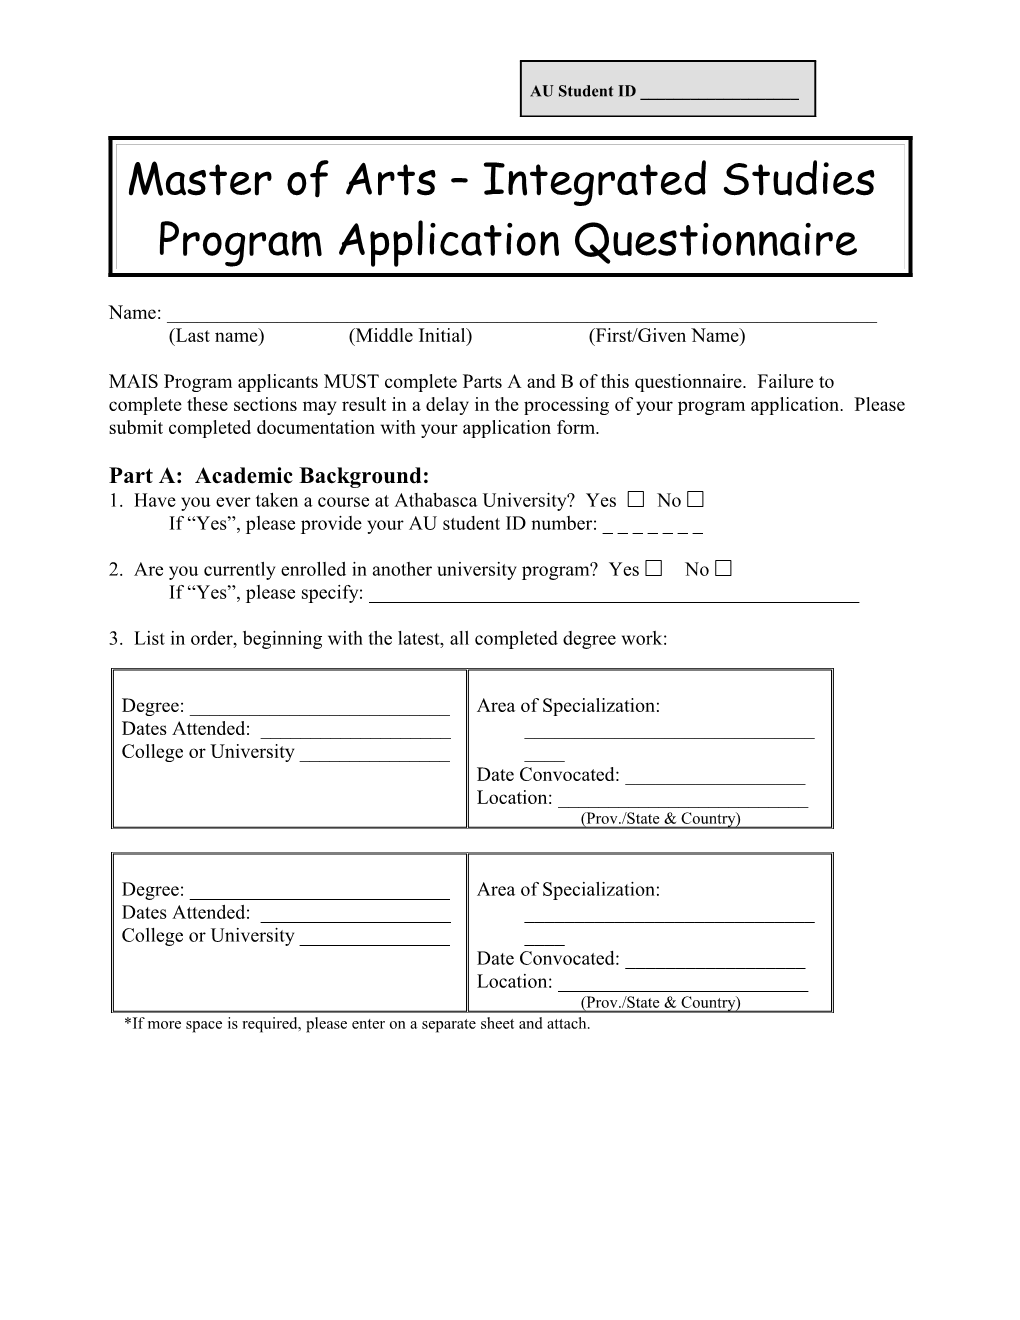 Master of Arts Integrated Studies Application Questionnaire